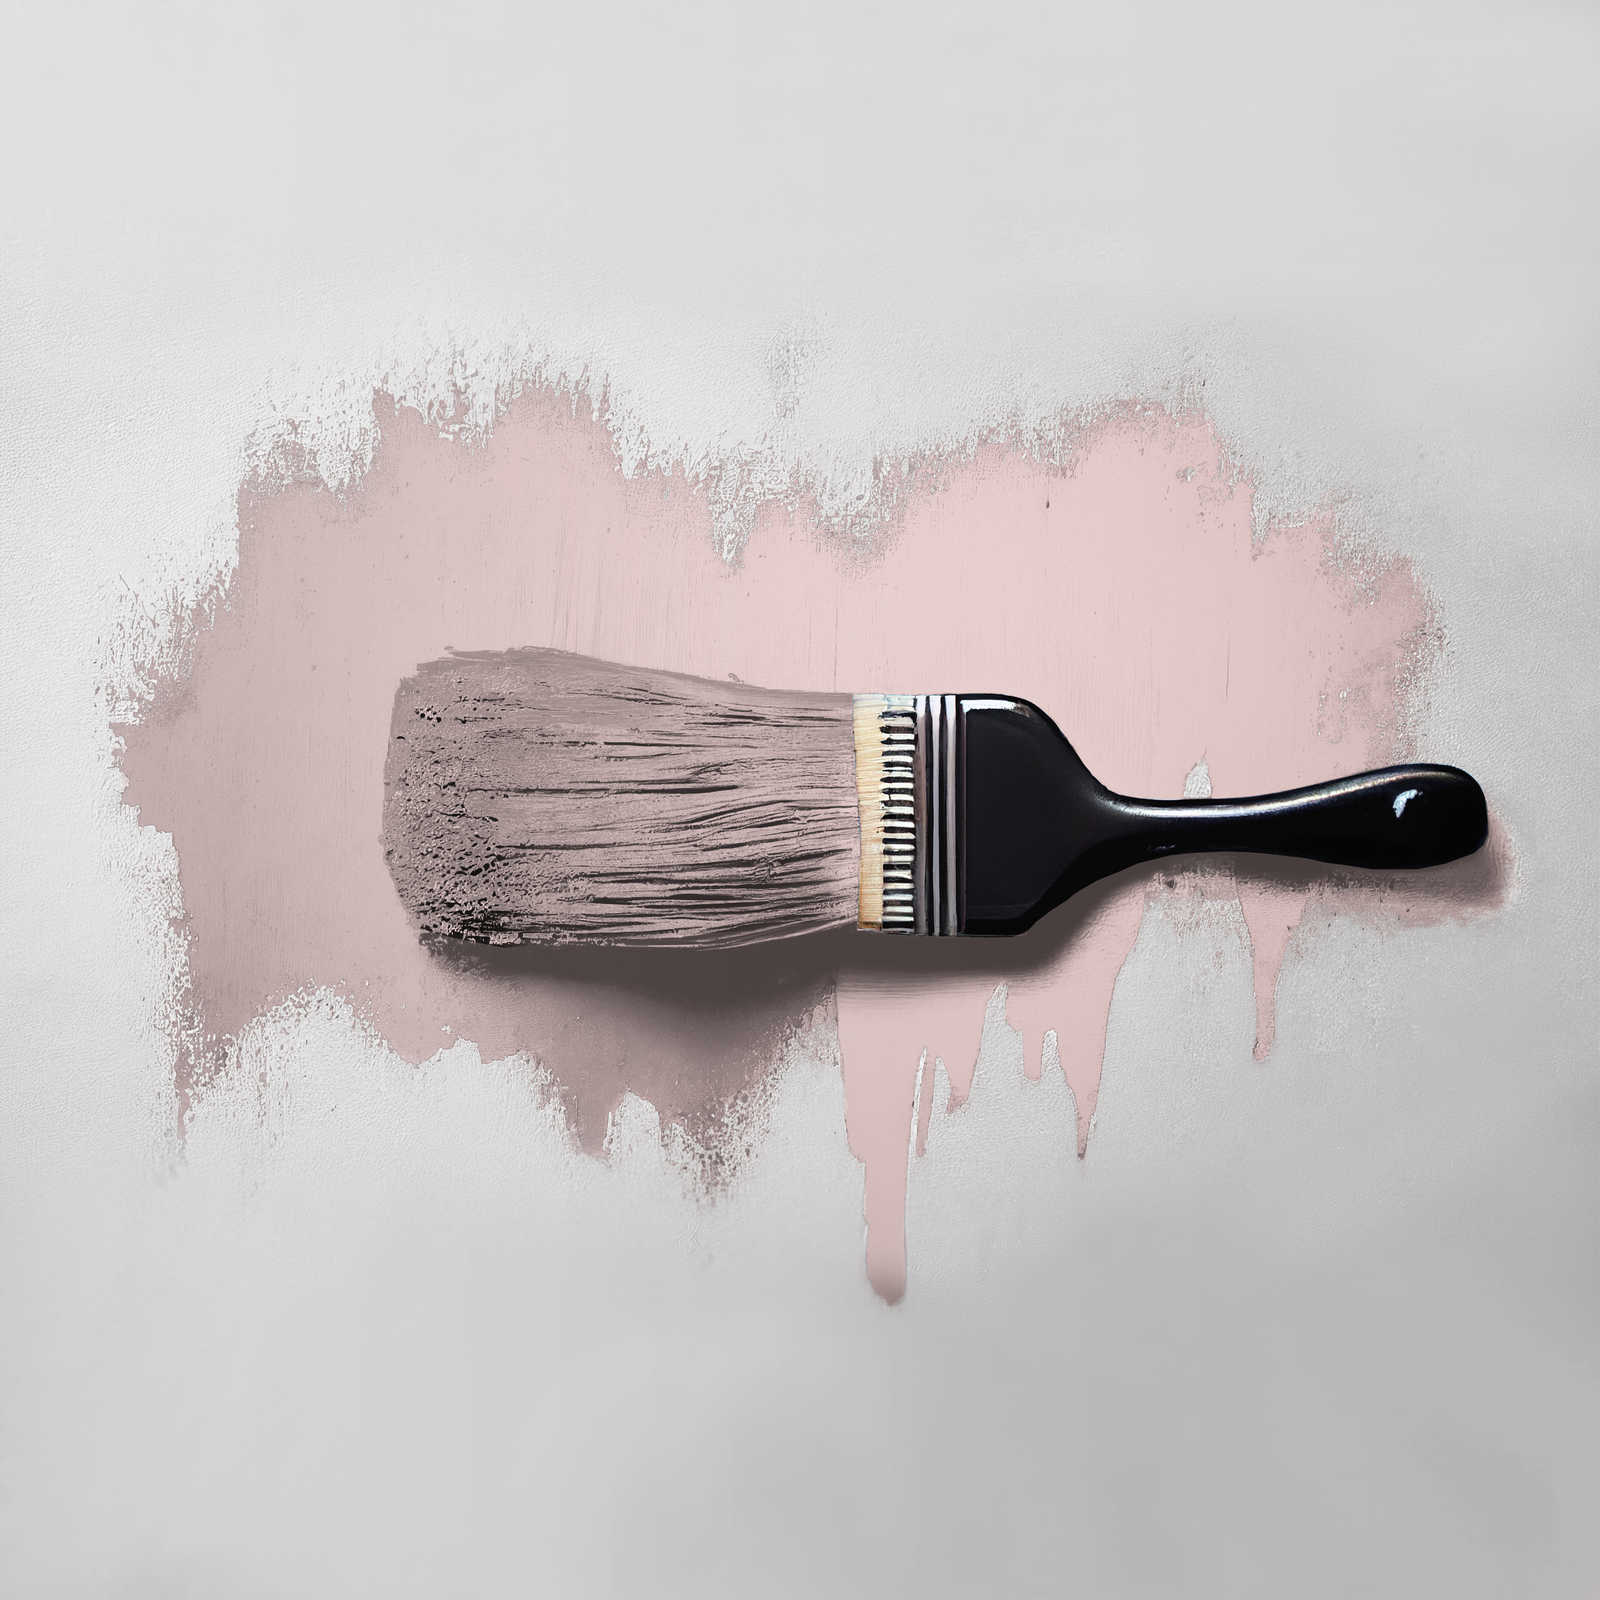             Wall Paint TCK7008 »Cute Cupcake« in delicate pink – 2.5 litre
        